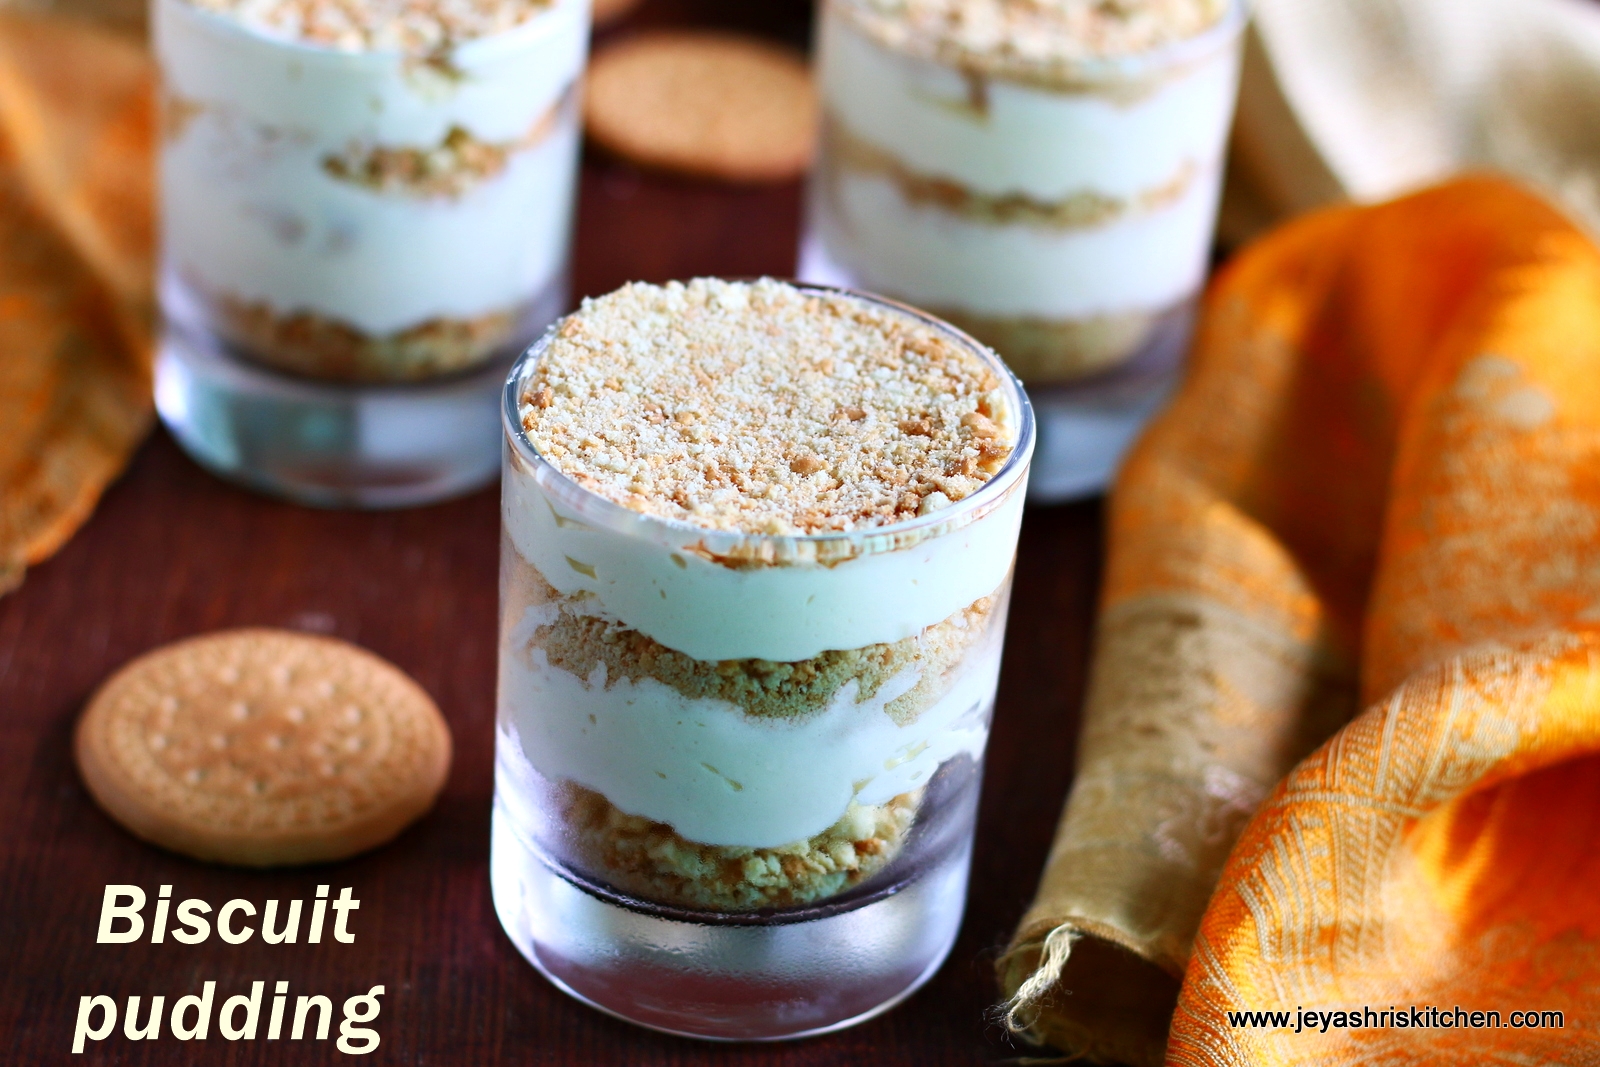 Biscuit pudding